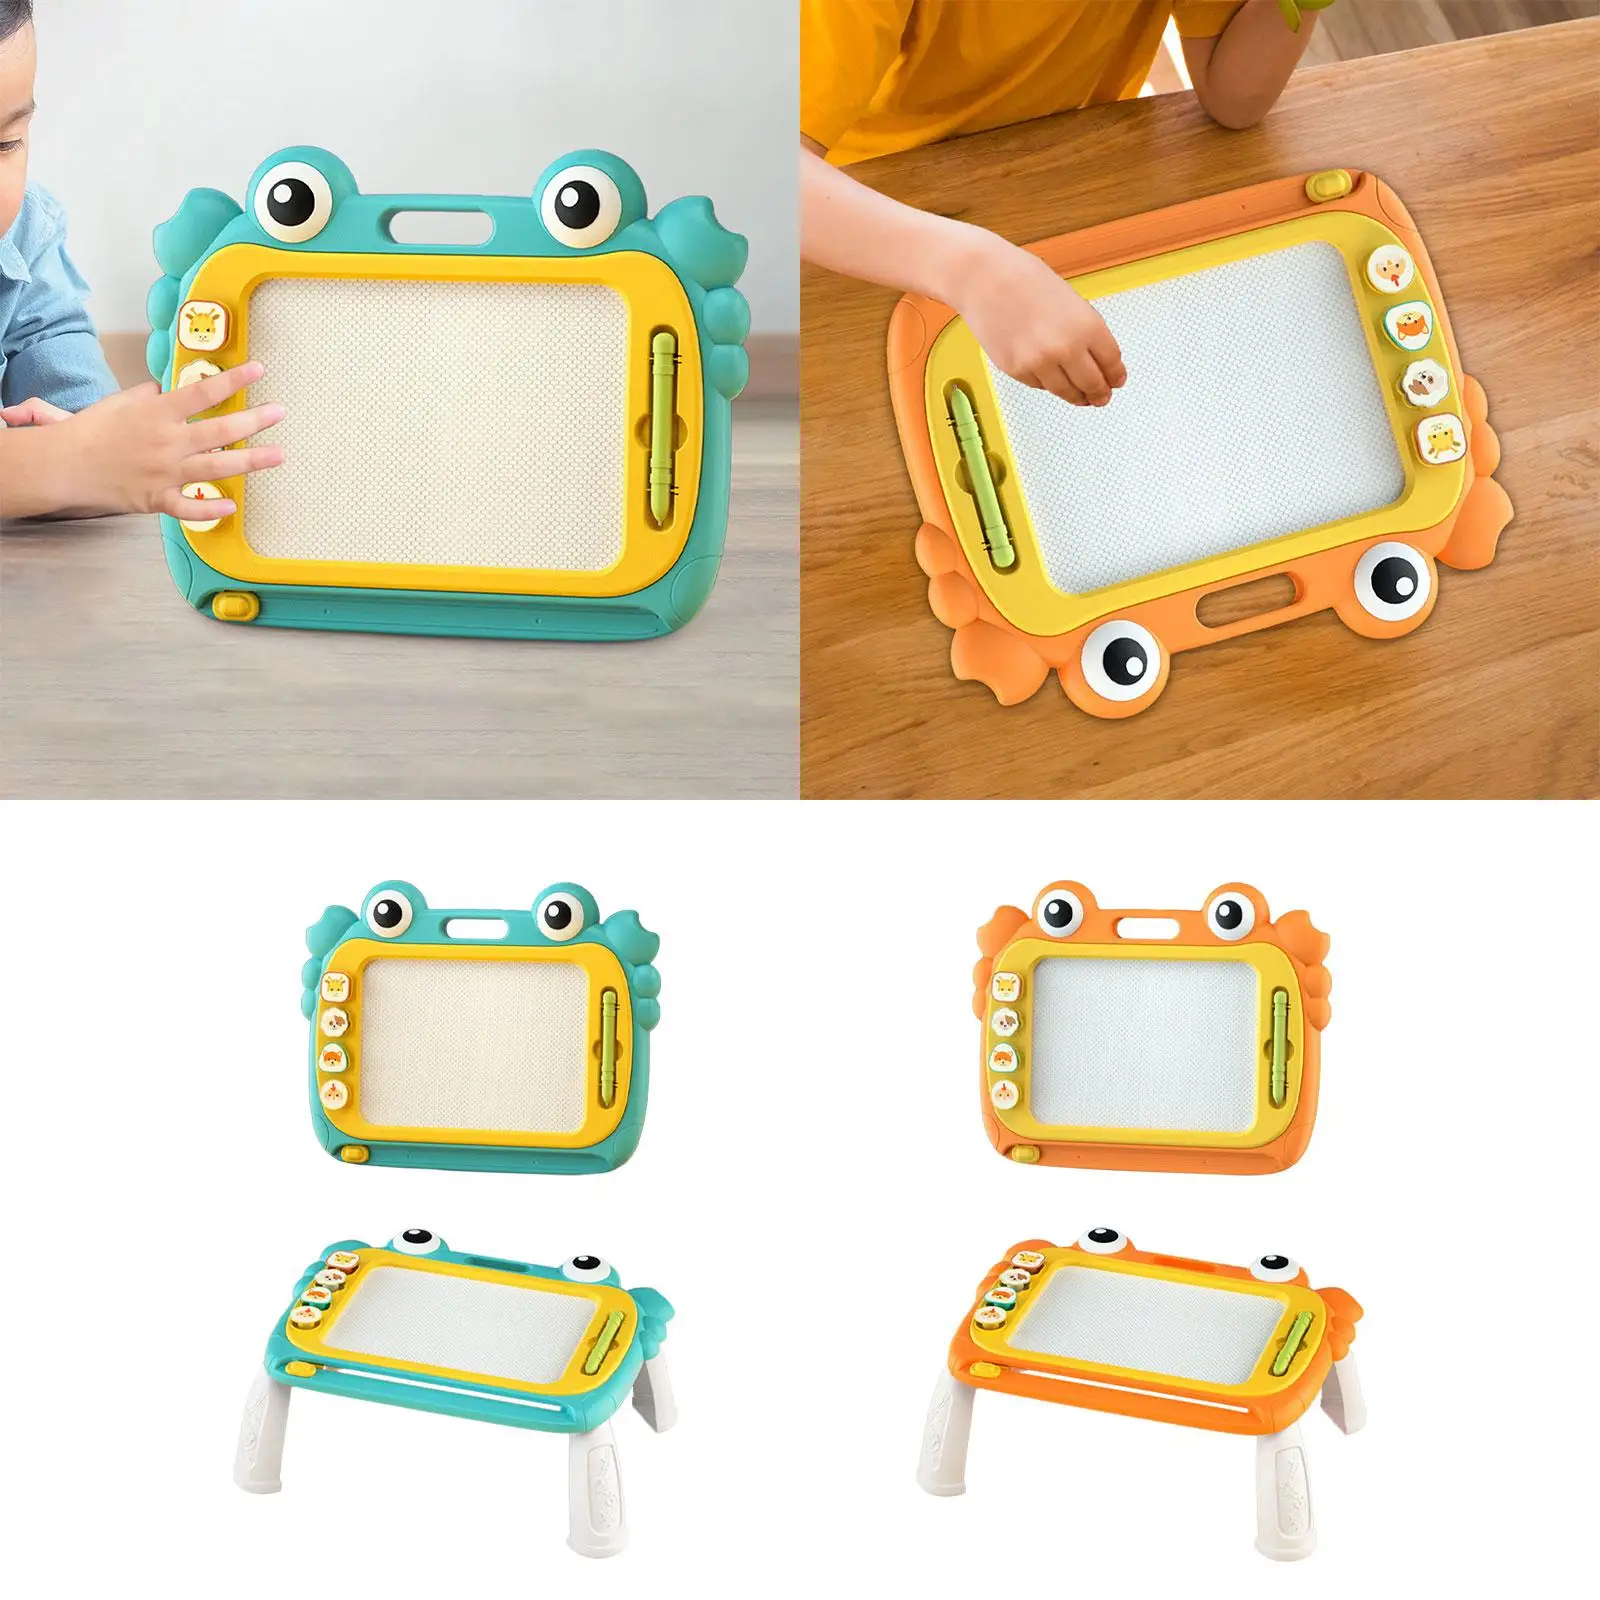 Magnetic Drawing Board Erasable with 4 Stampers Writing Painting Sketch Pad for Boys Girls Toddlers Children Kids Birthday Gift